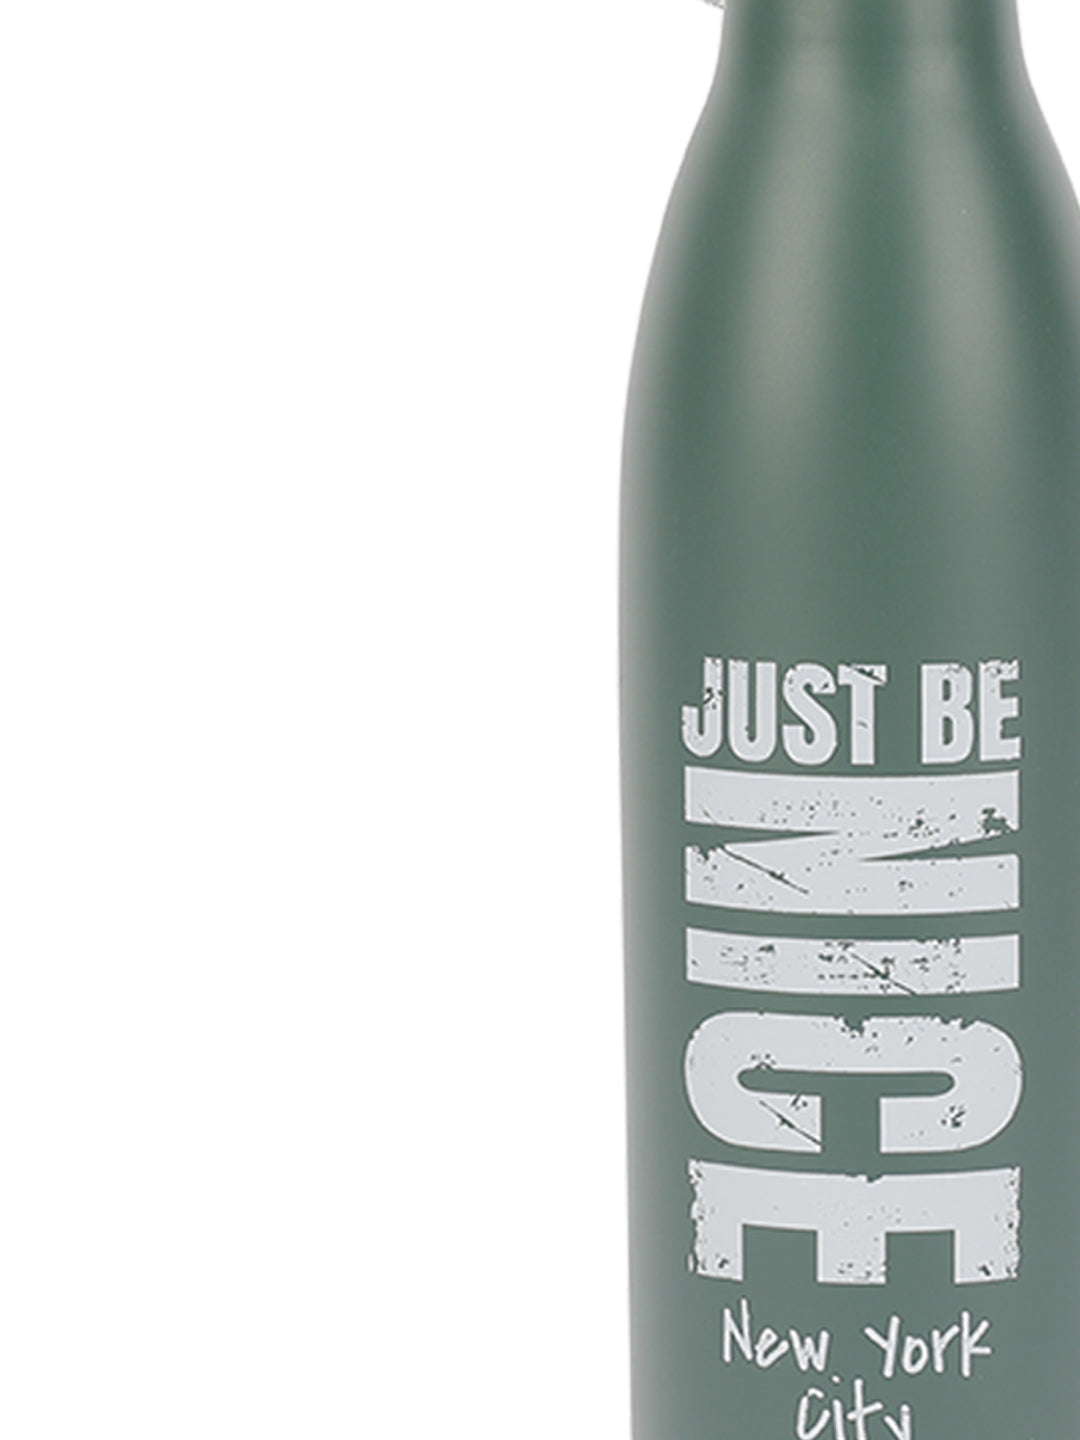 VON CASA 750Ml Stainless Steel Water Bottles With Rope - Teal Green